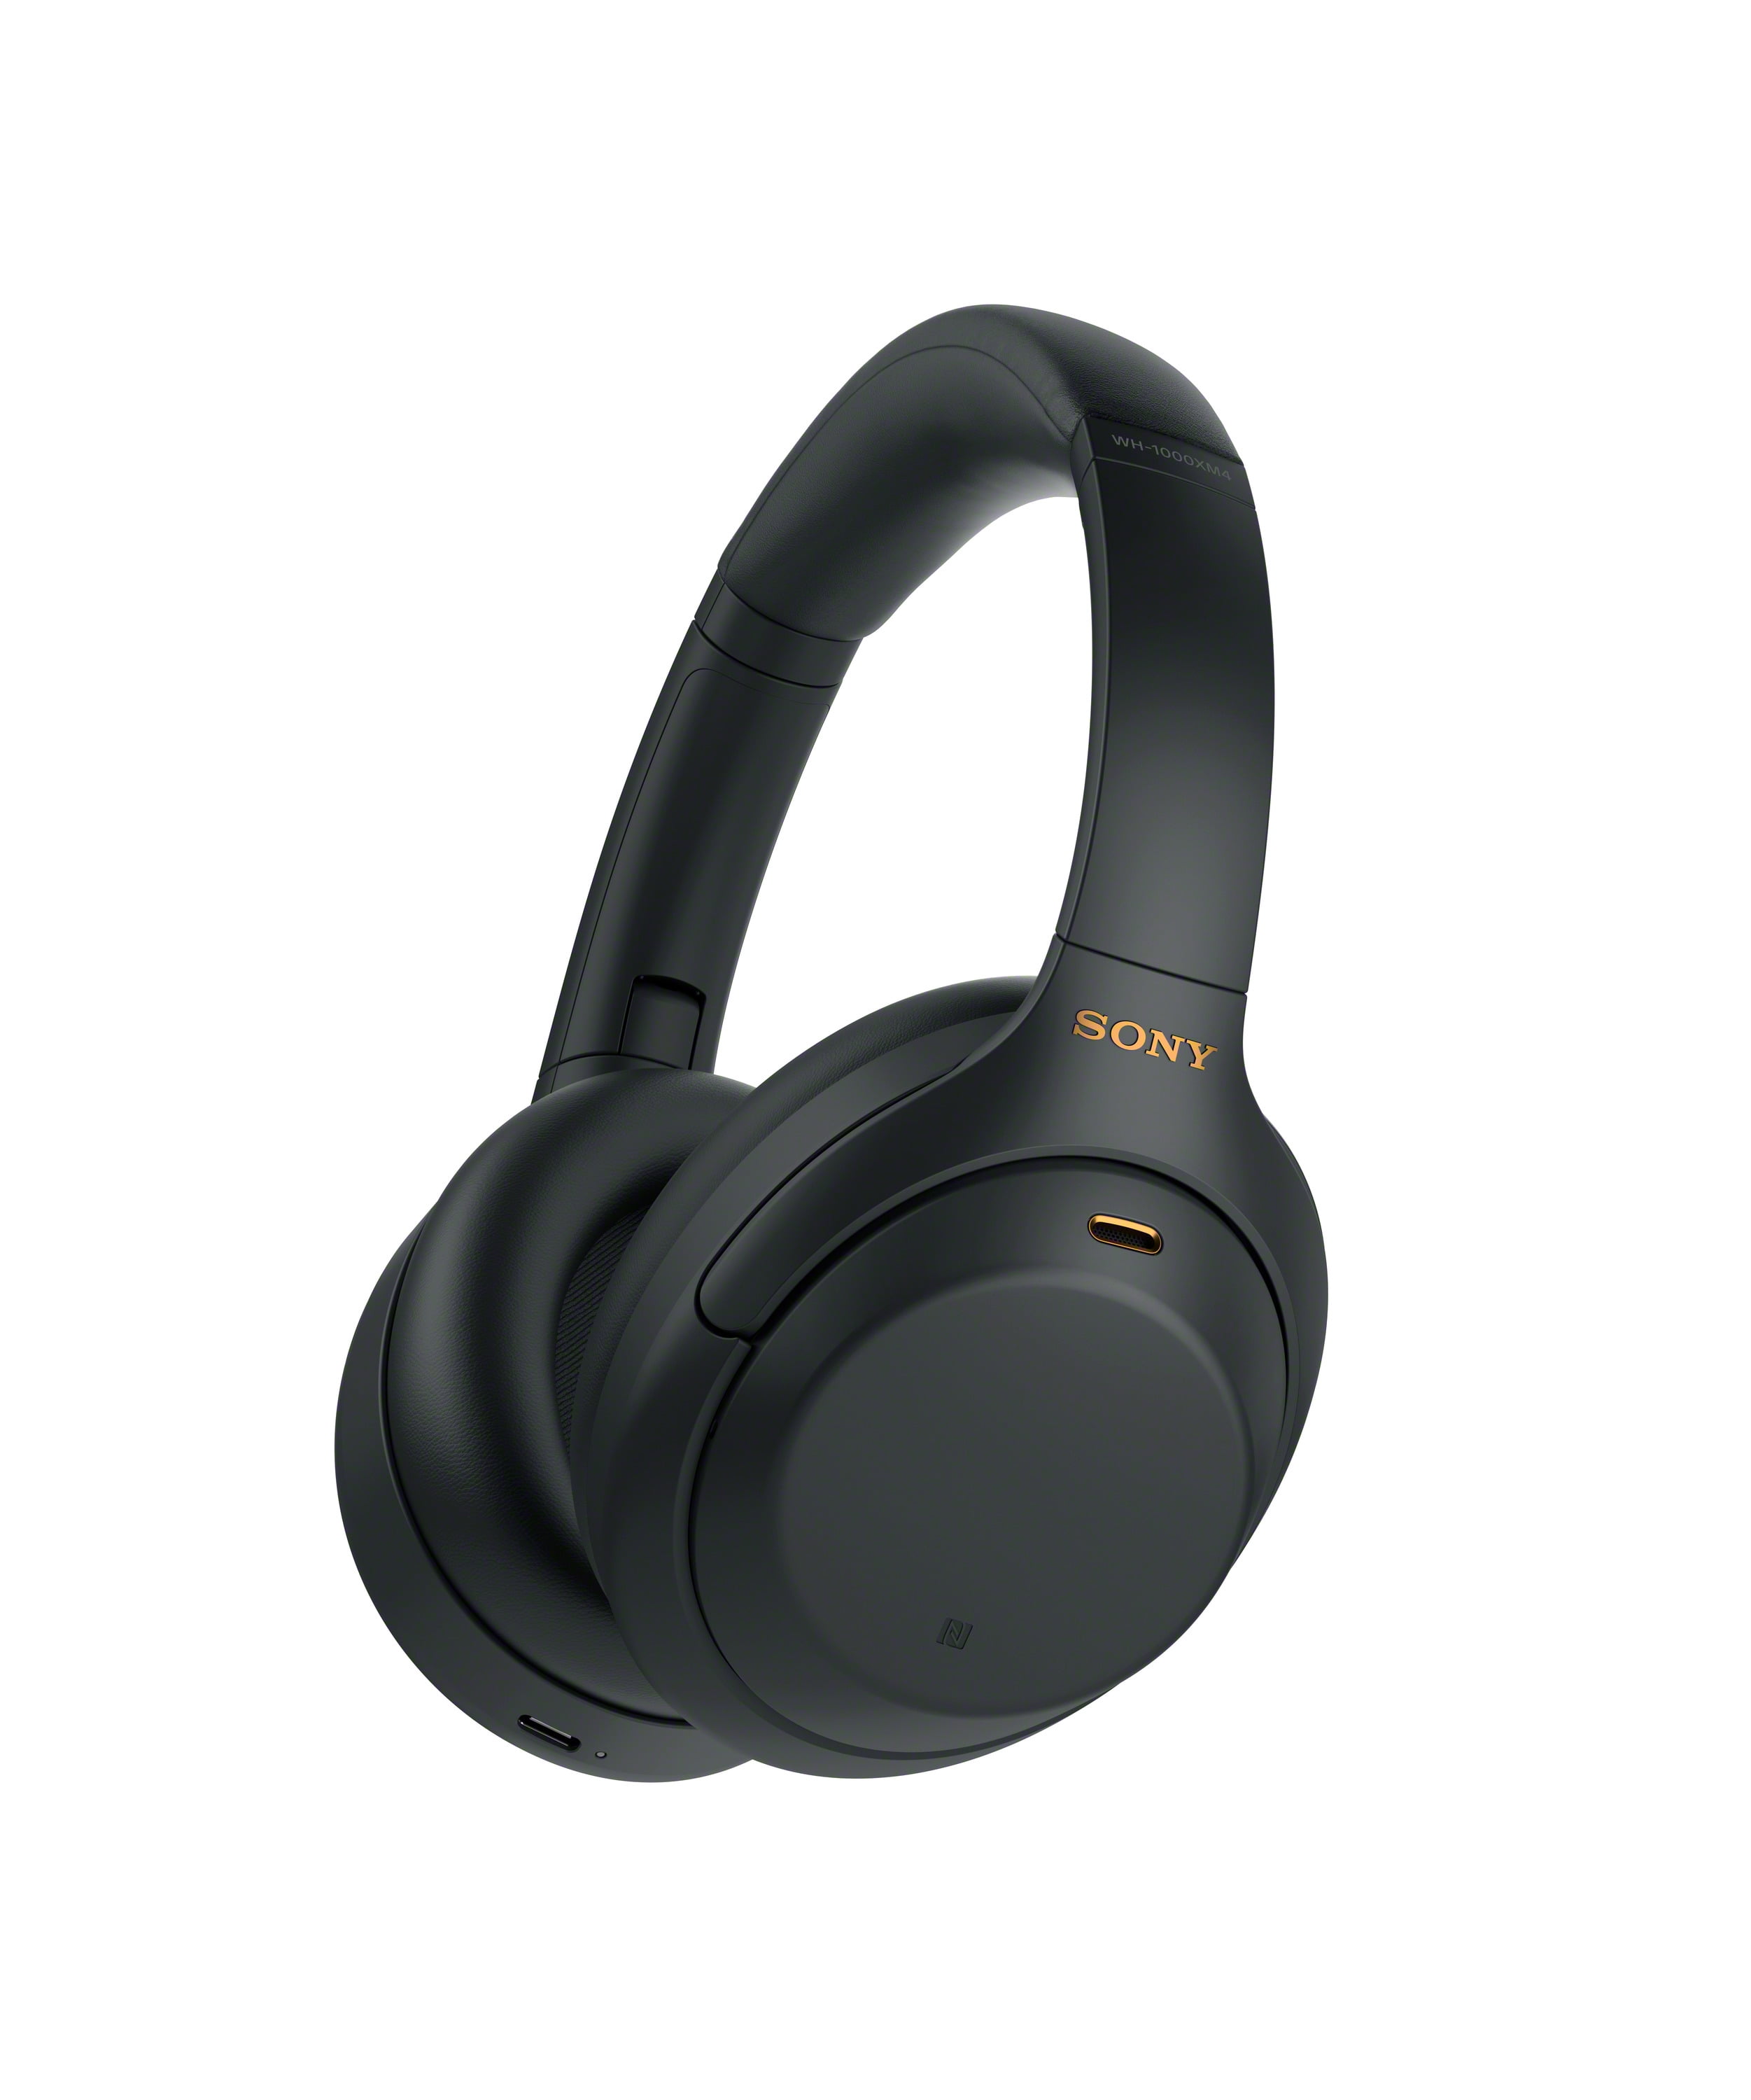 Sony WH-1000XM4 Wireless Noise Canceling Over-the-Ear Headphones with Google Assistant - Black